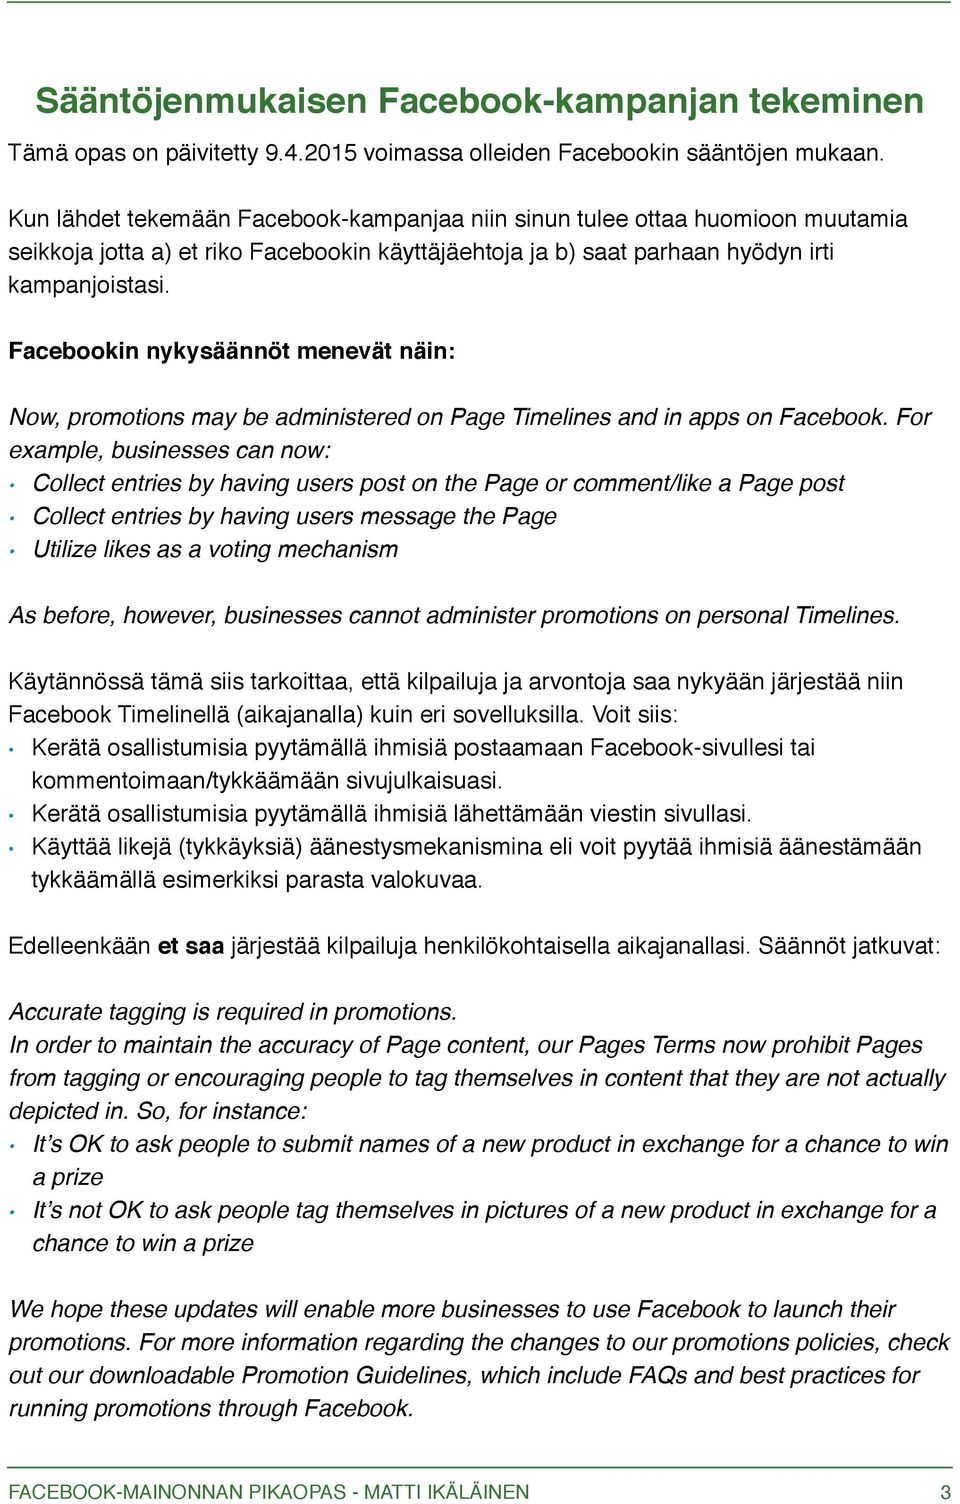 Facebookin nykysäännöt menevät näin: Now, promotions may be administered on Page Timelines and in apps on Facebook.